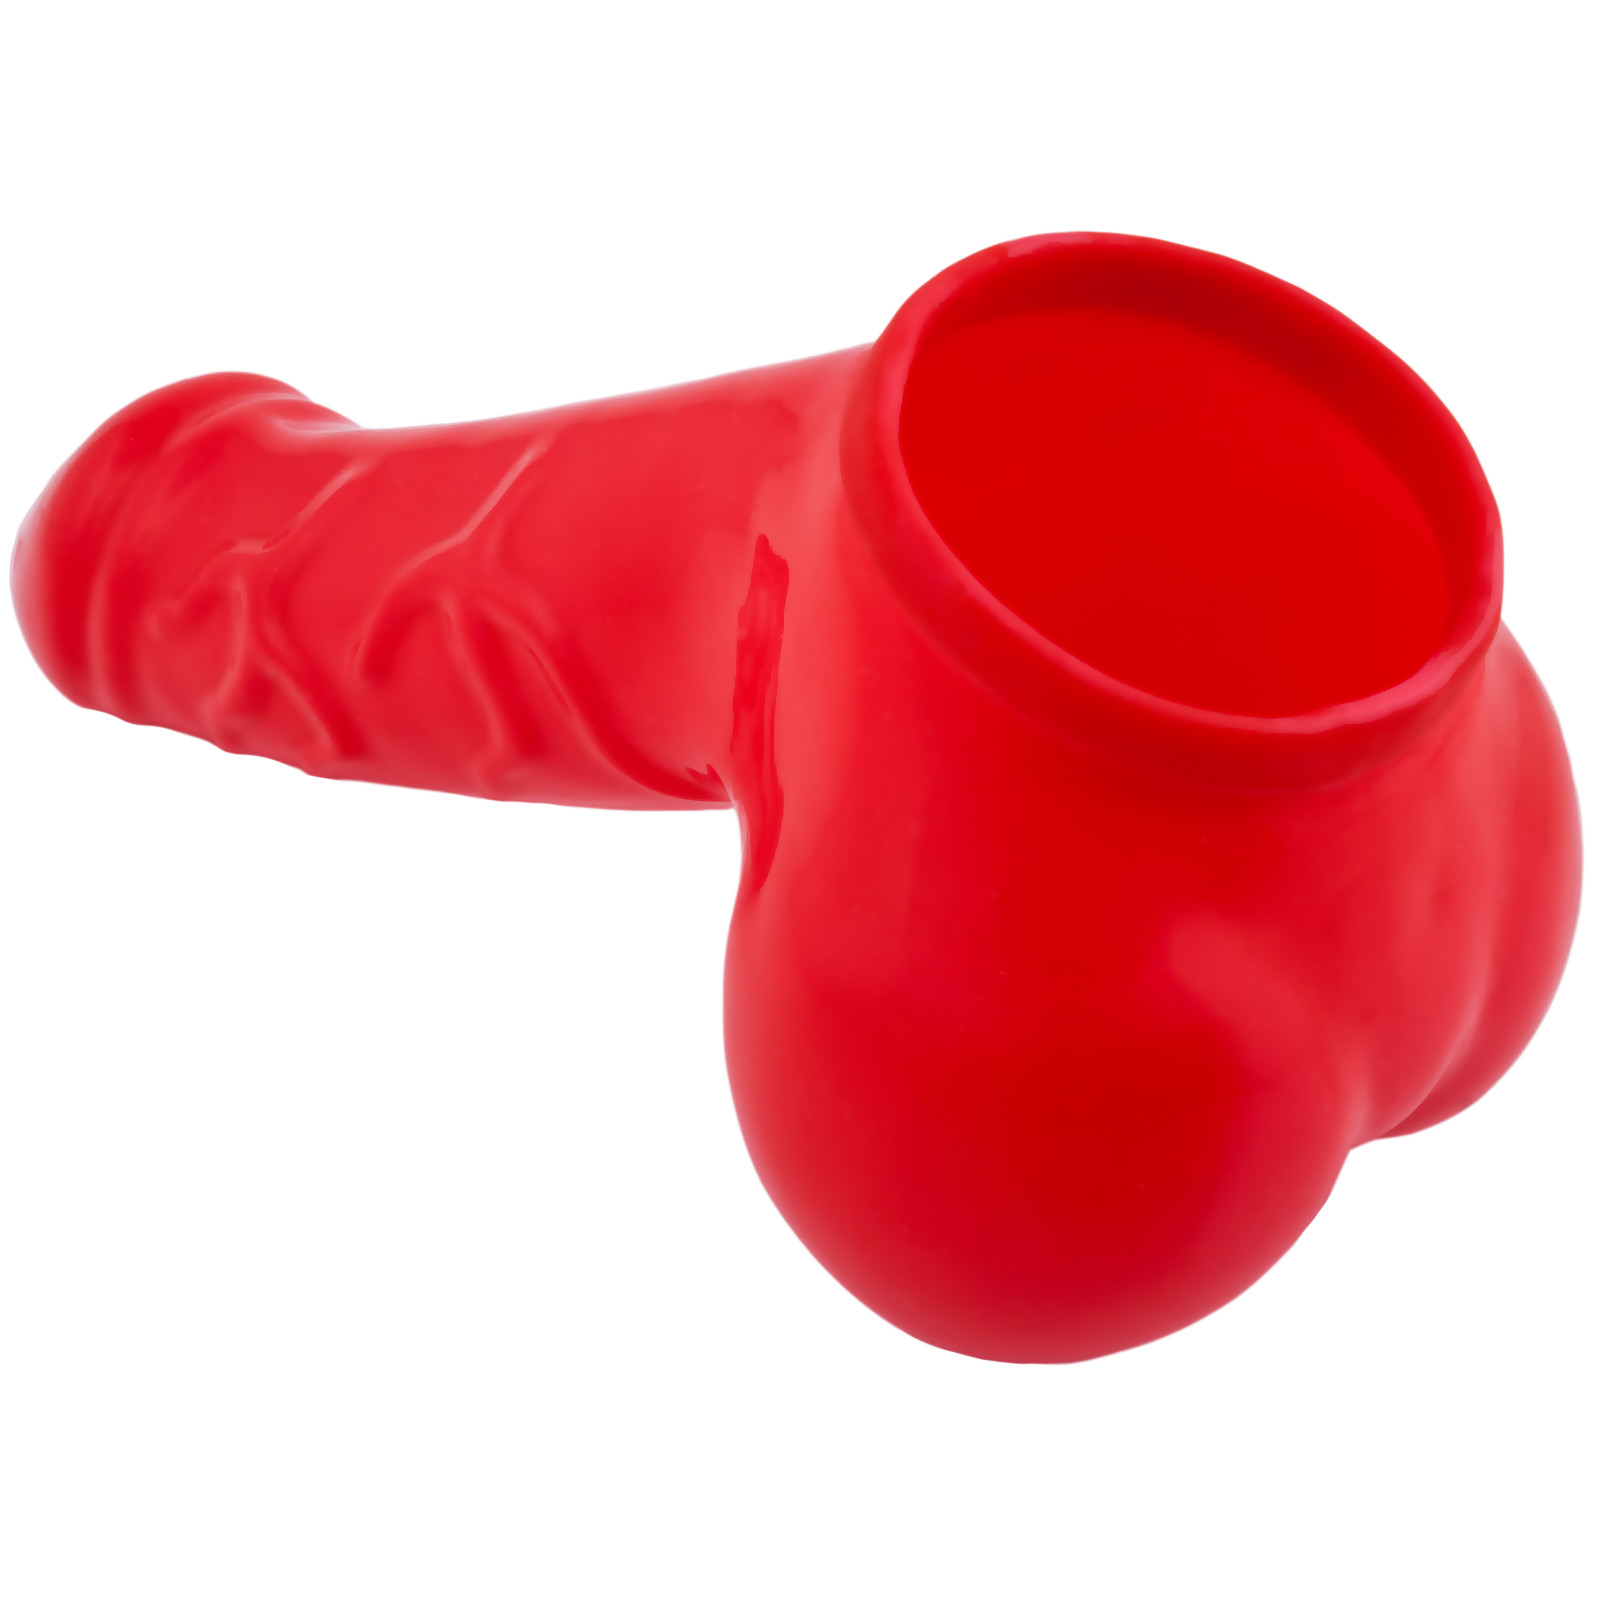 Toylie Latex Penis Sleeve «DANNY» red, with strong veins and testicle divider